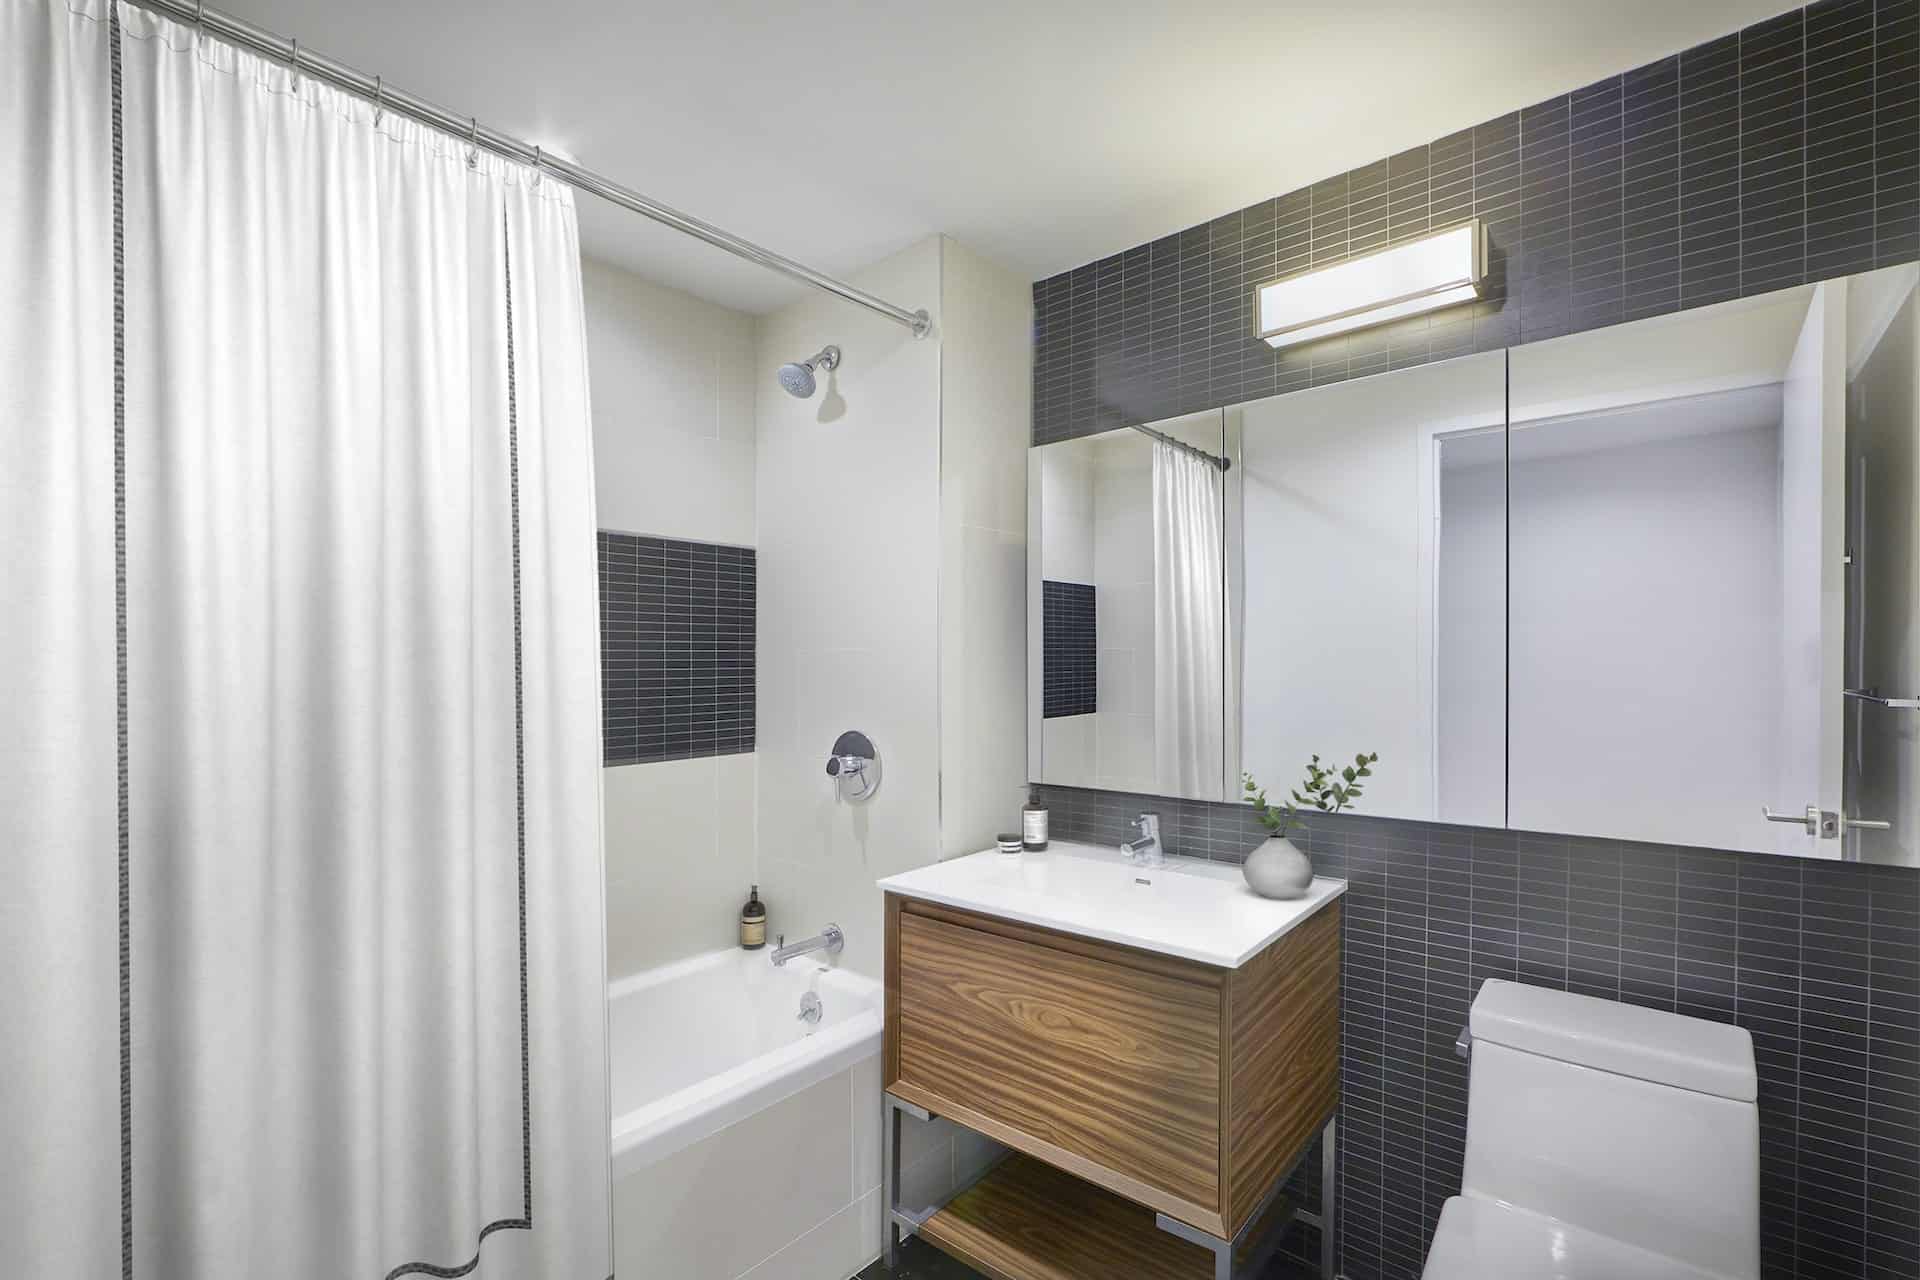 Bathroom at 325 Lafayette Avenue apartments in Brooklyn with single vanity, a large mirror and a soaking tub with shower.